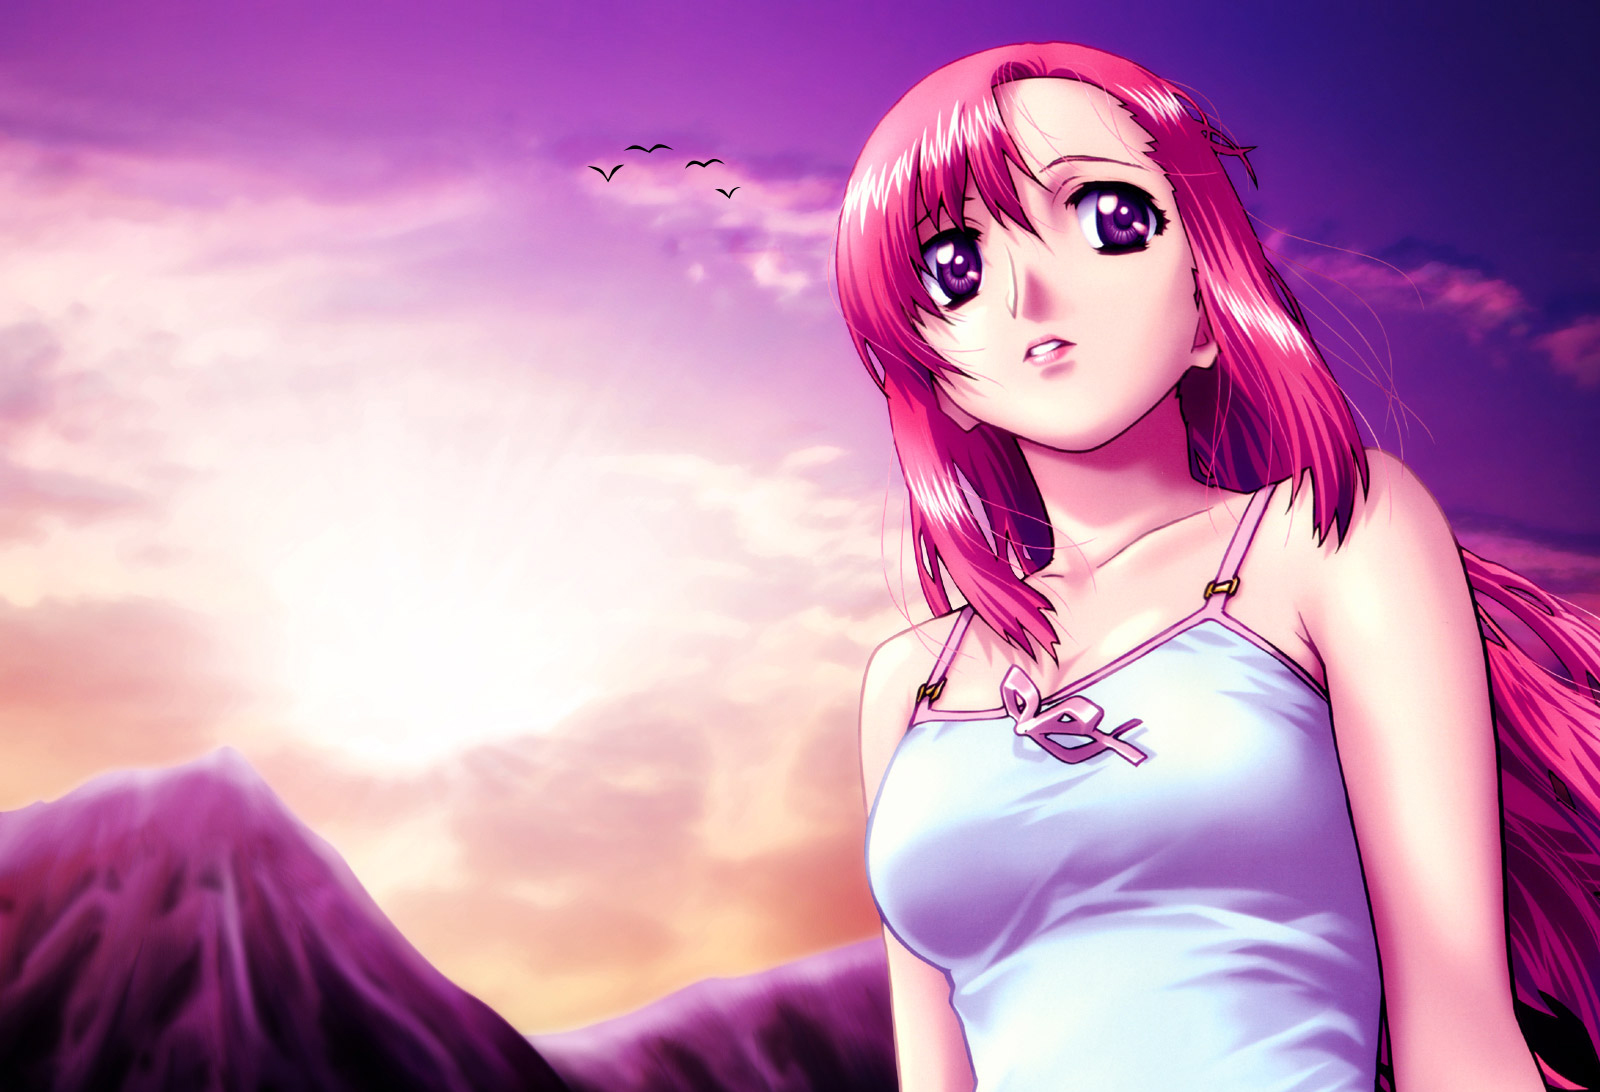 Pictures Download Anime Girl Backgrounds - Anime Pink Girl Backgrounds -  1600x1092 Wallpaper 